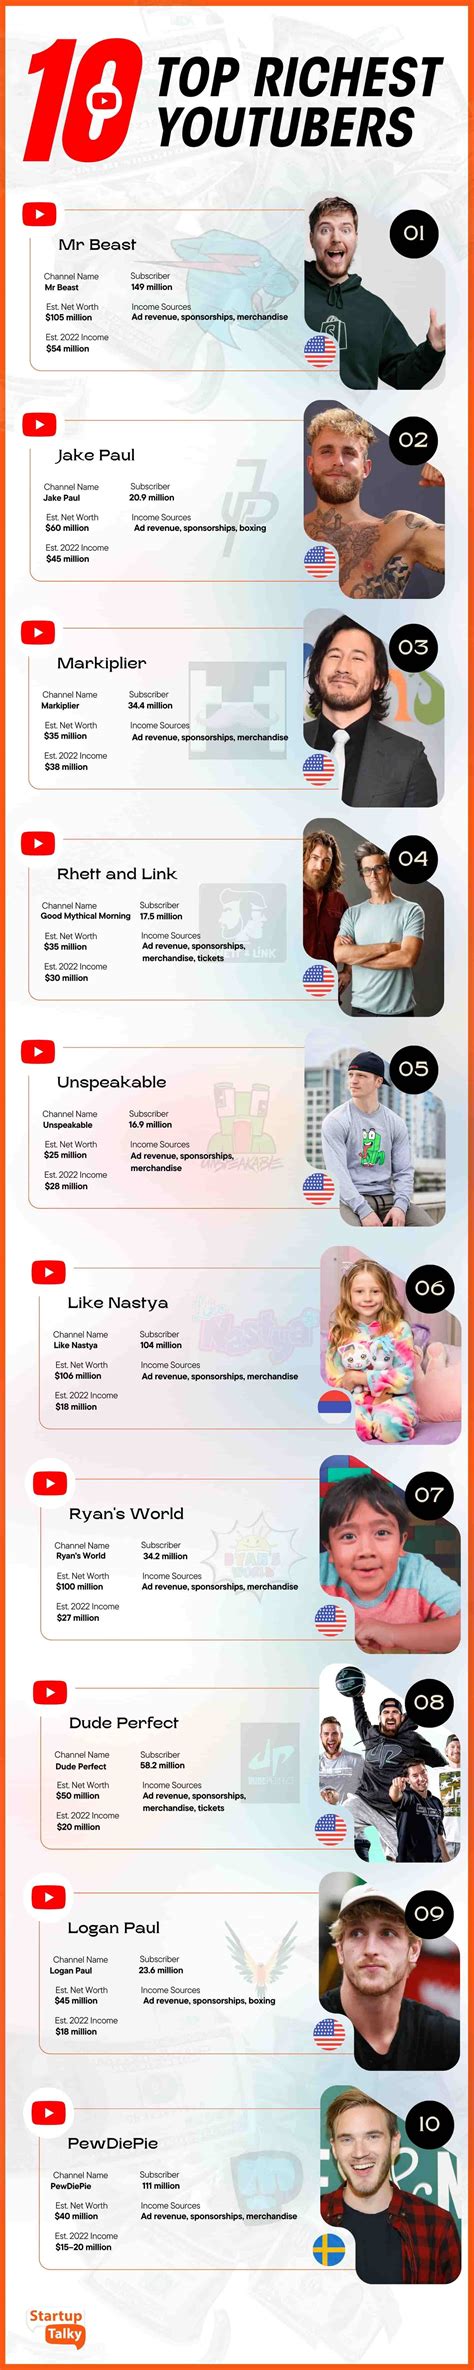 Top Richest Youtubers In